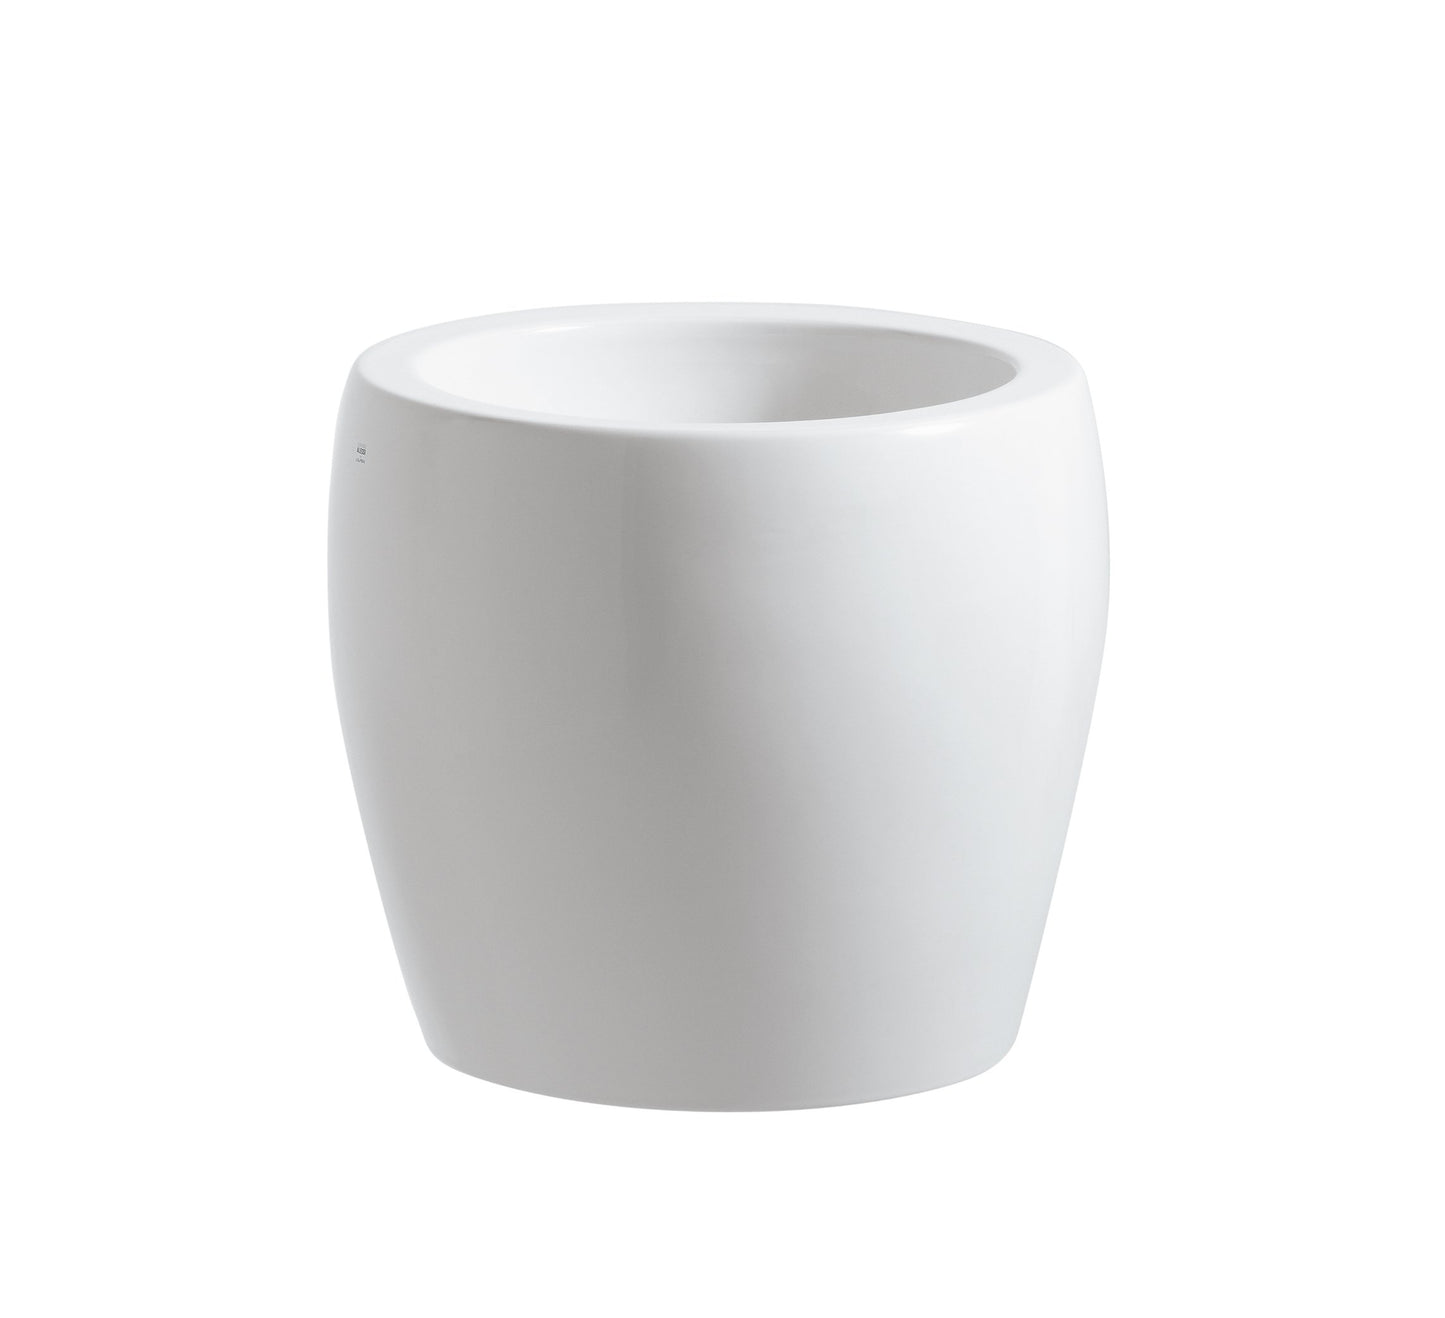 LAUFEN ALESSI ONE WASHBASIN BOWL WITH FIXED OPEN WASTE VALVE 8.9818.4, INCLUDING CERAMIC WASTE COVER SIZE: 45 X 45 CM WHITE - 8.1197.3.400.109.1 - Tadmur Trading